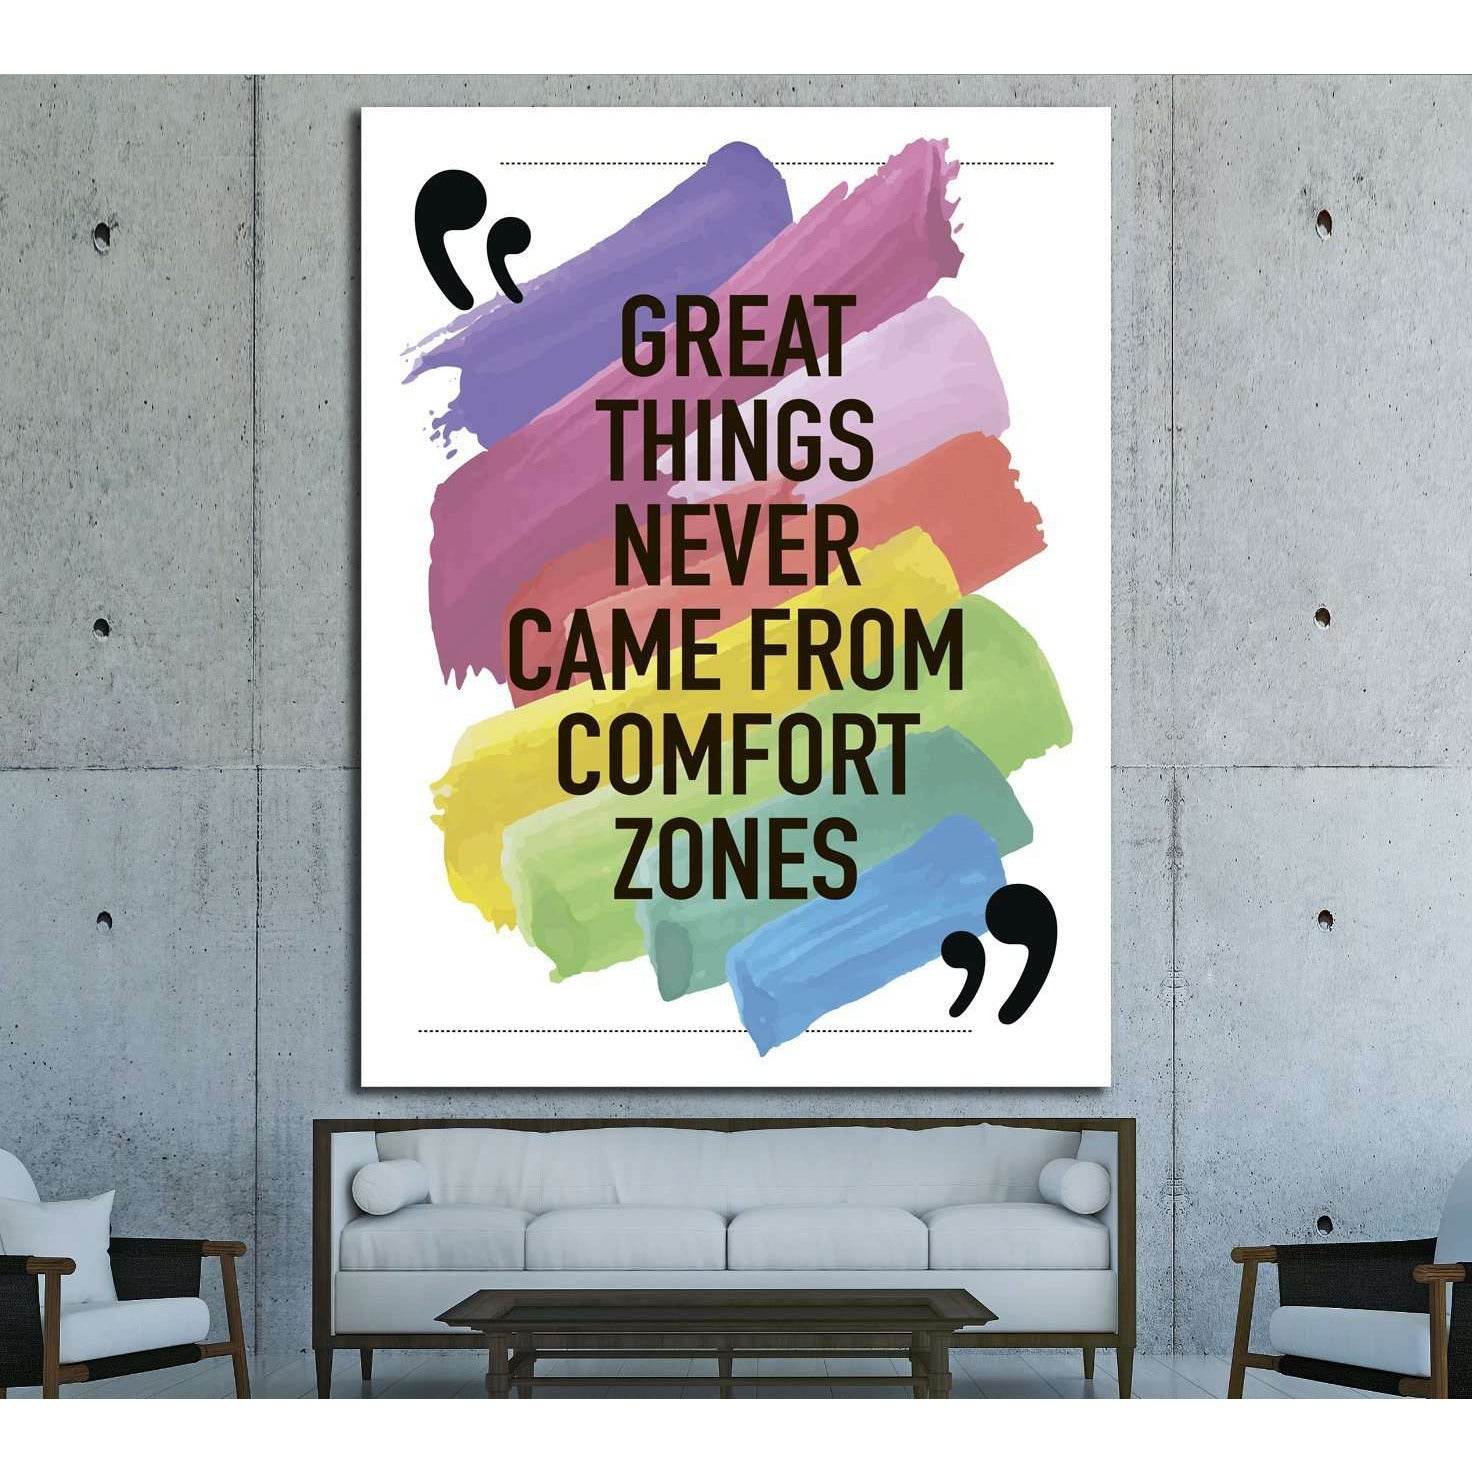 23+ Motivational Quotes Great Things Never Came From Comfort Zones